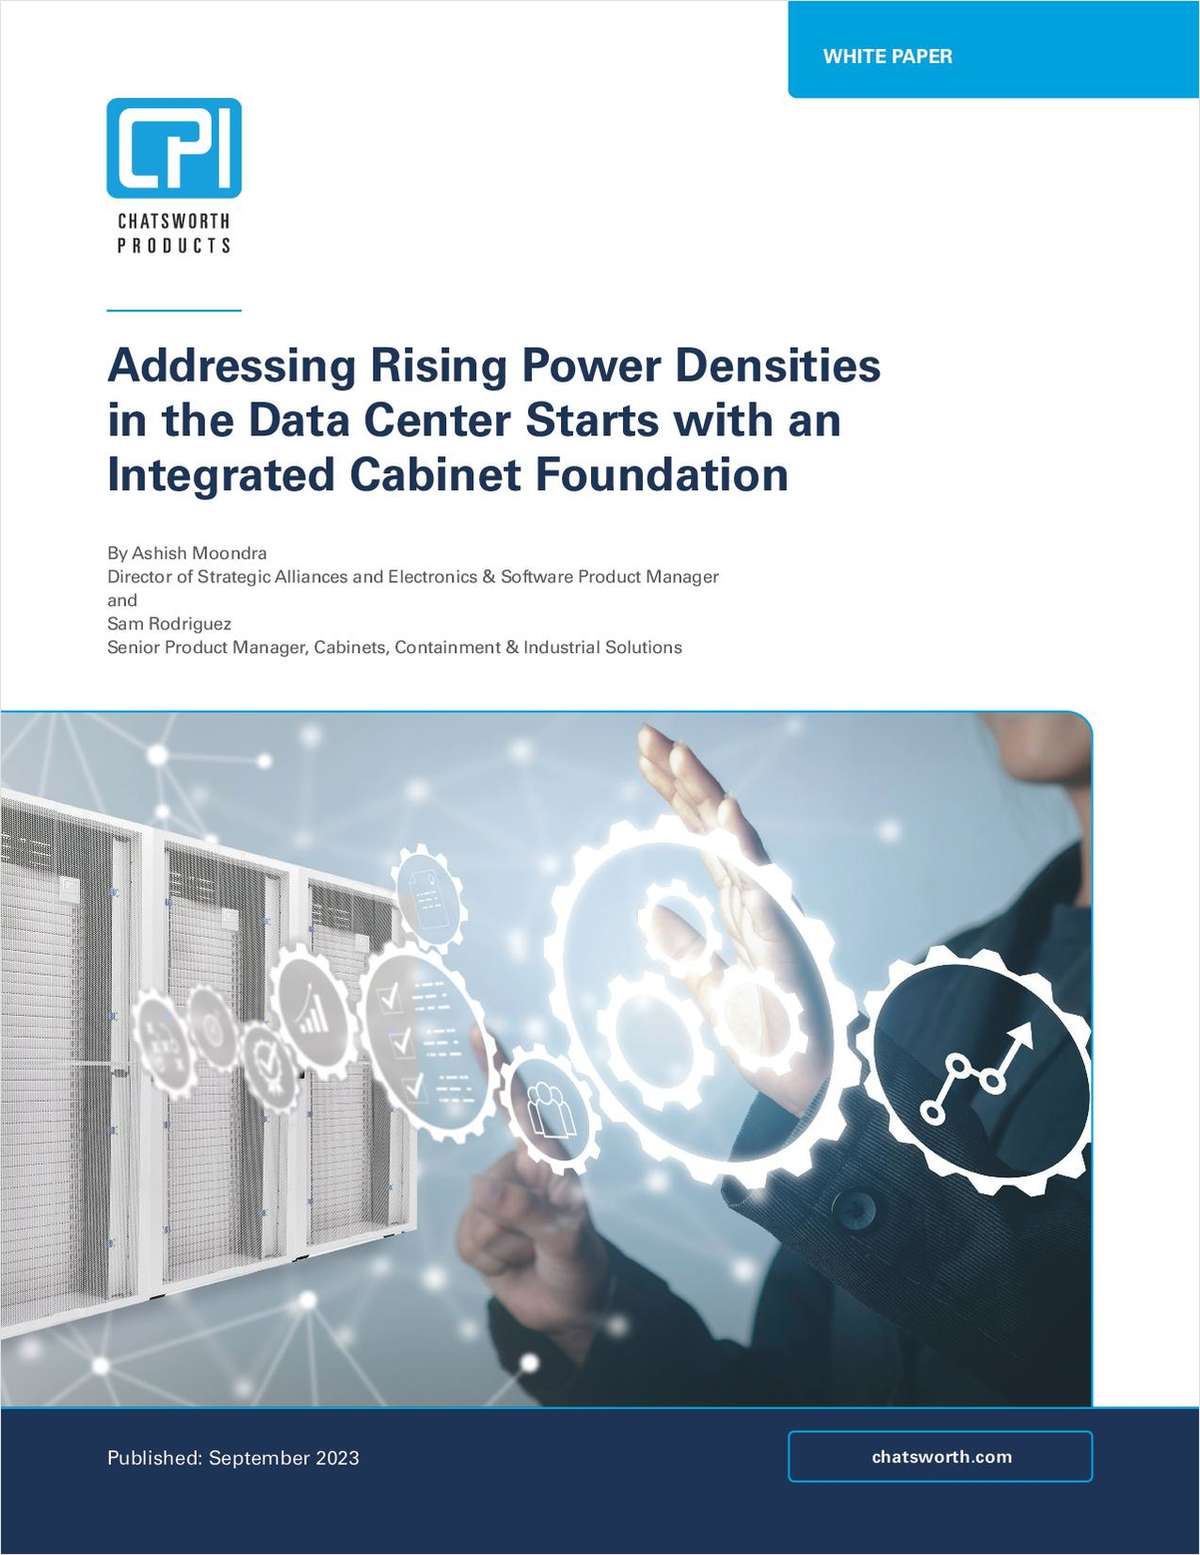 Rising Power Densities in the Data Center Starting with an Integrated Cabinet Foundation